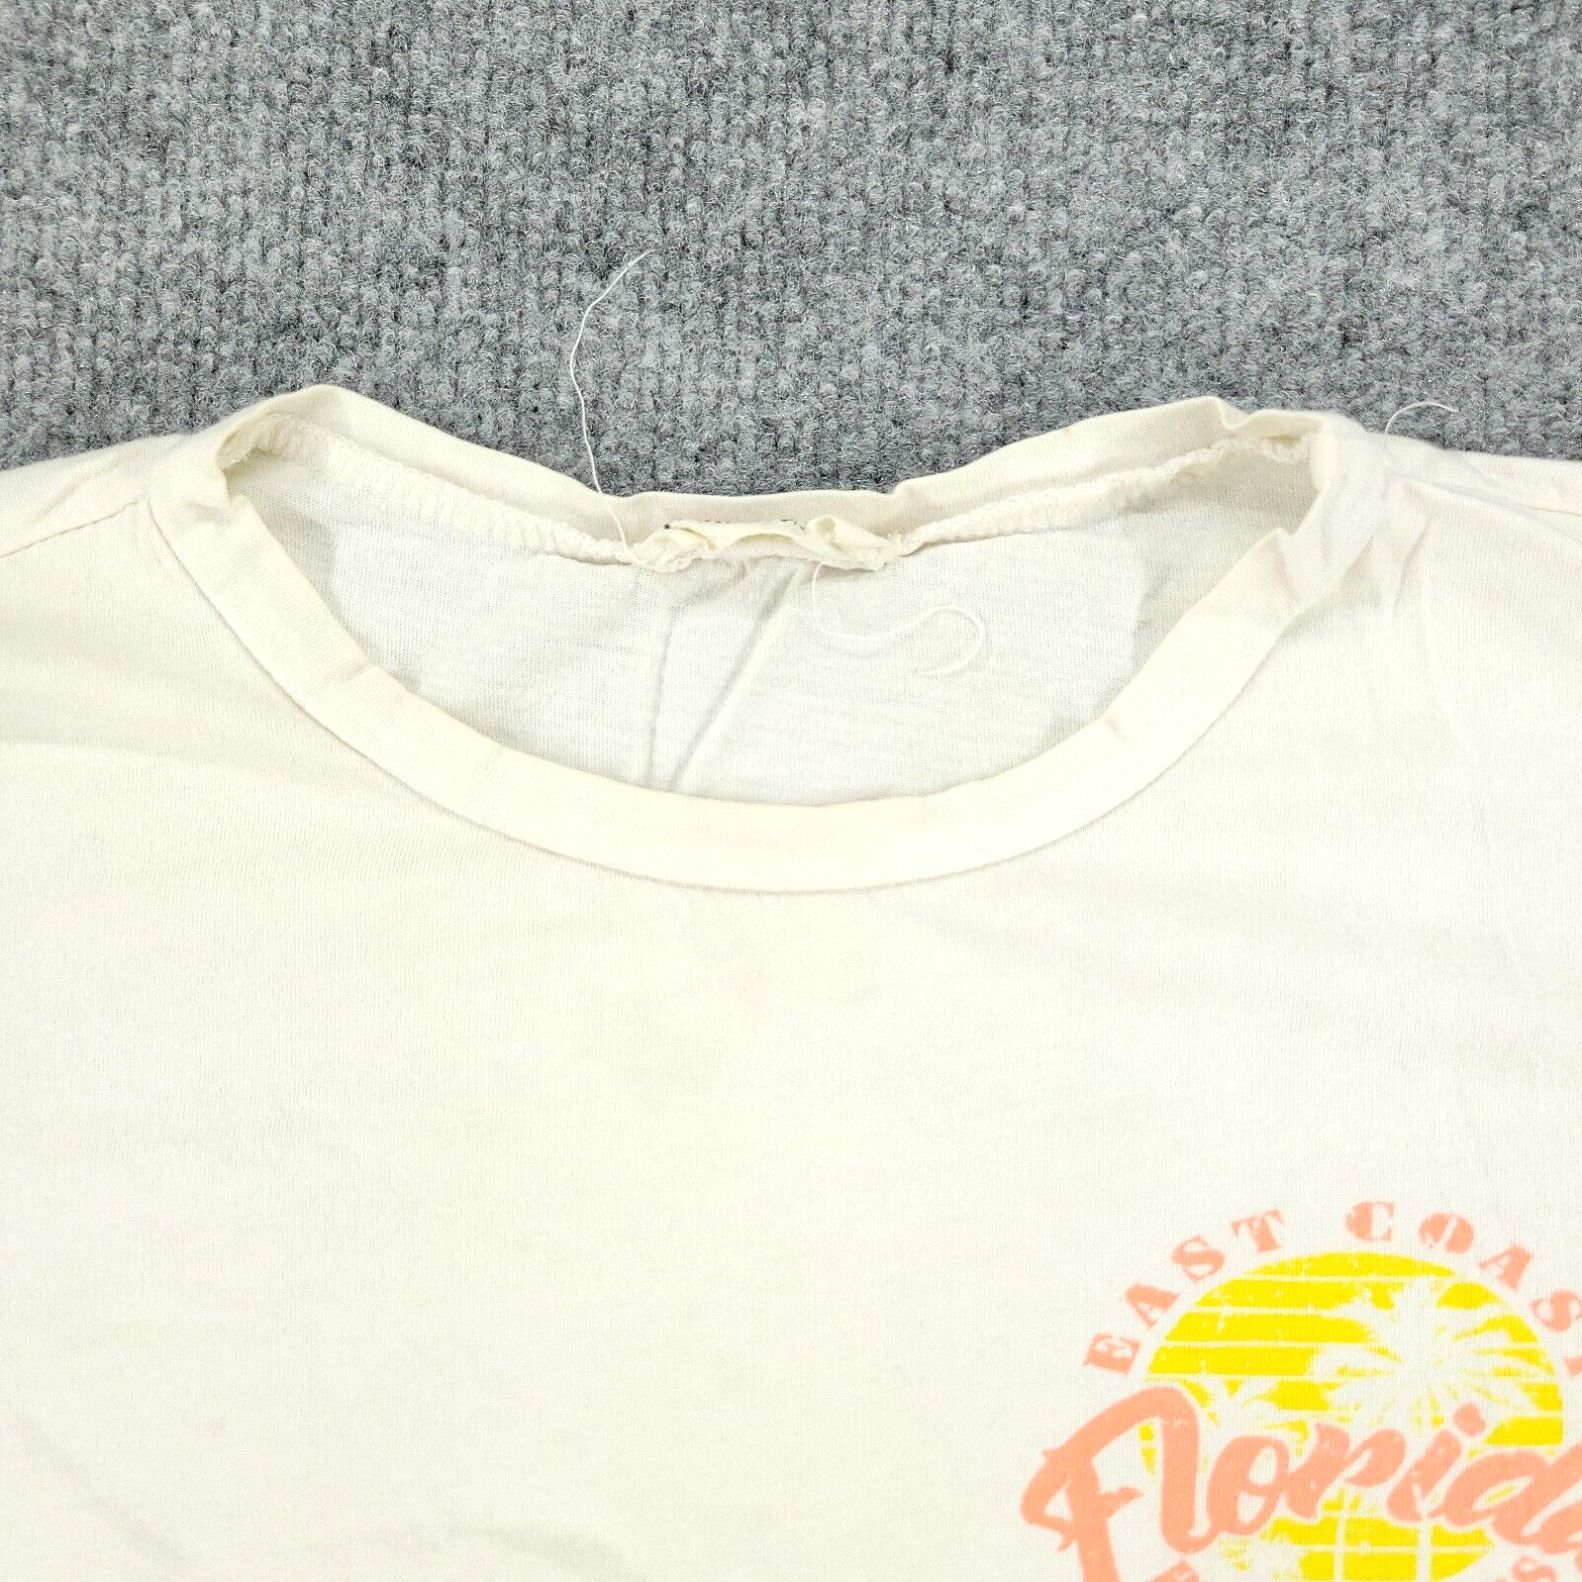 Vintage French Pastry Shirt Women Large White Florida Beach Graphic Tee Short Sleeve Top Size L / US 10 / IT 46 - 3 Thumbnail